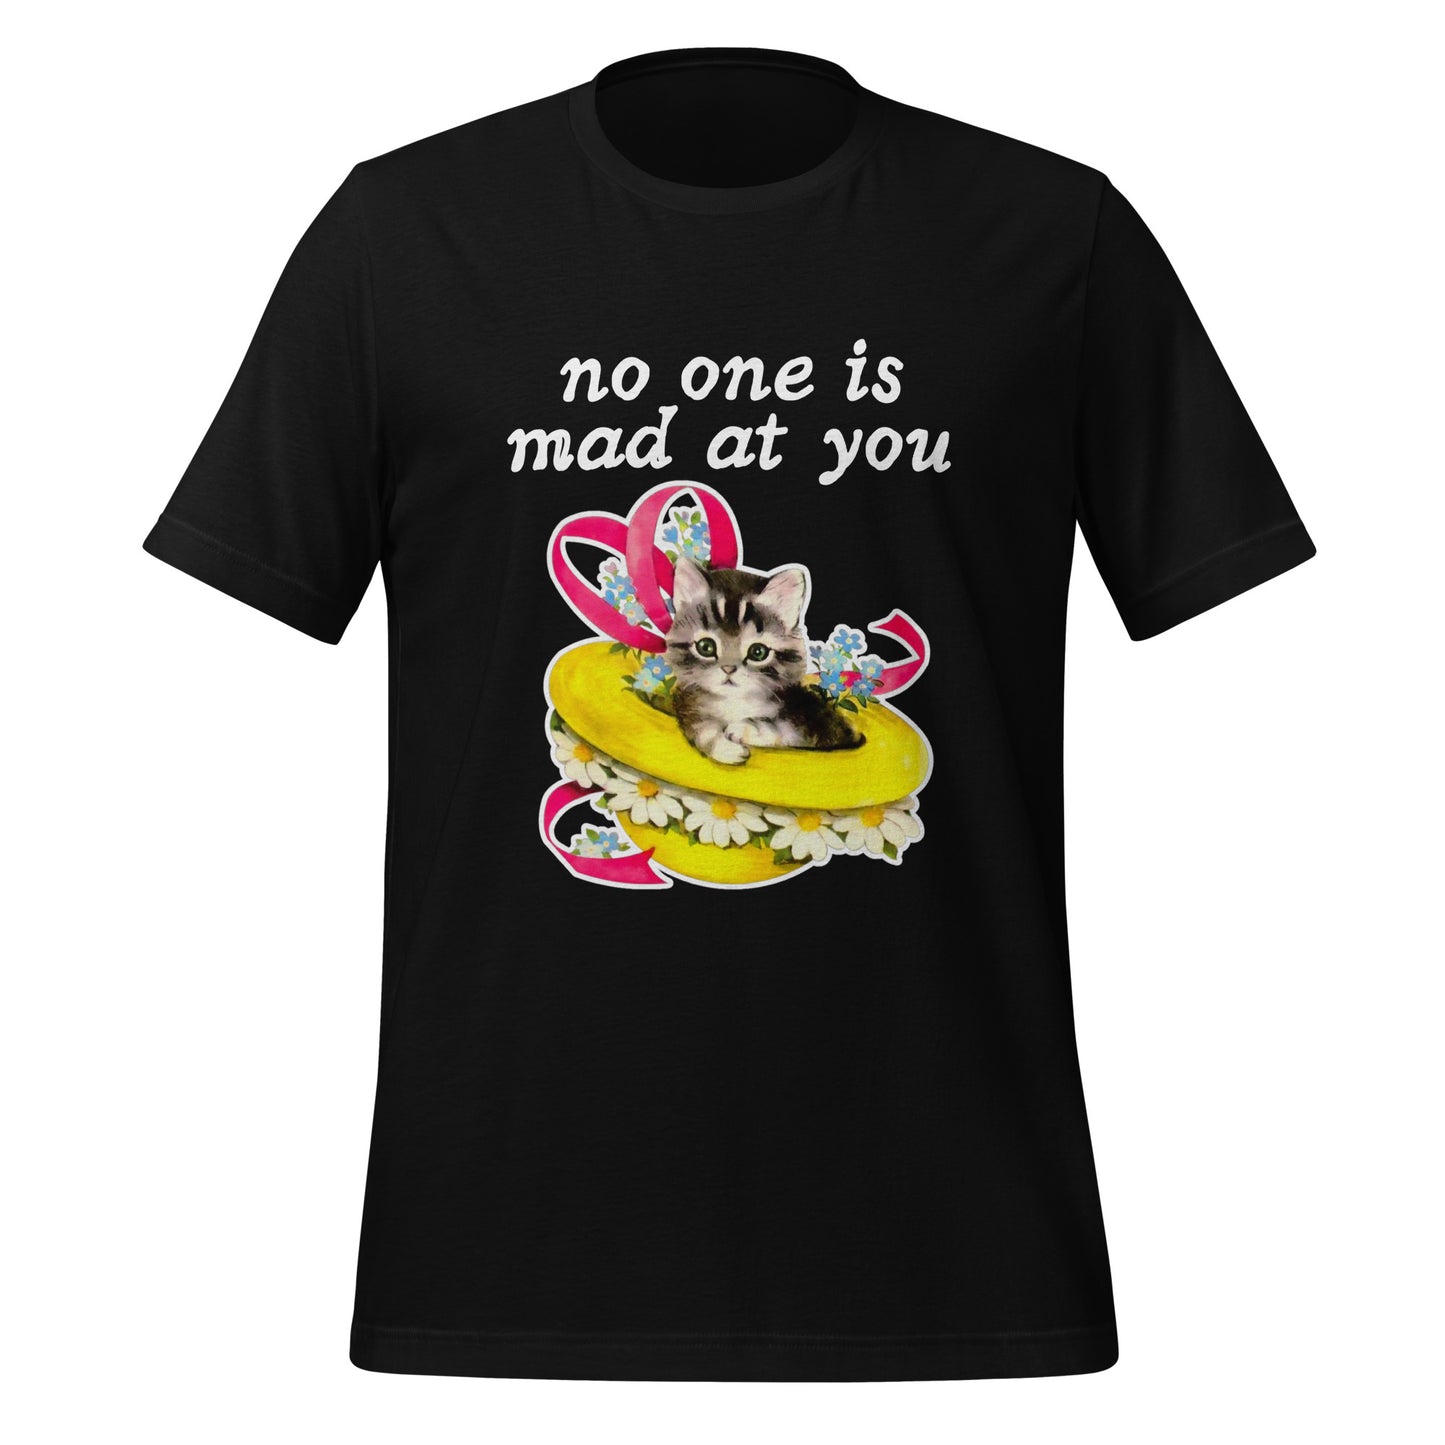 No One is Mad at You Unisex Shirt